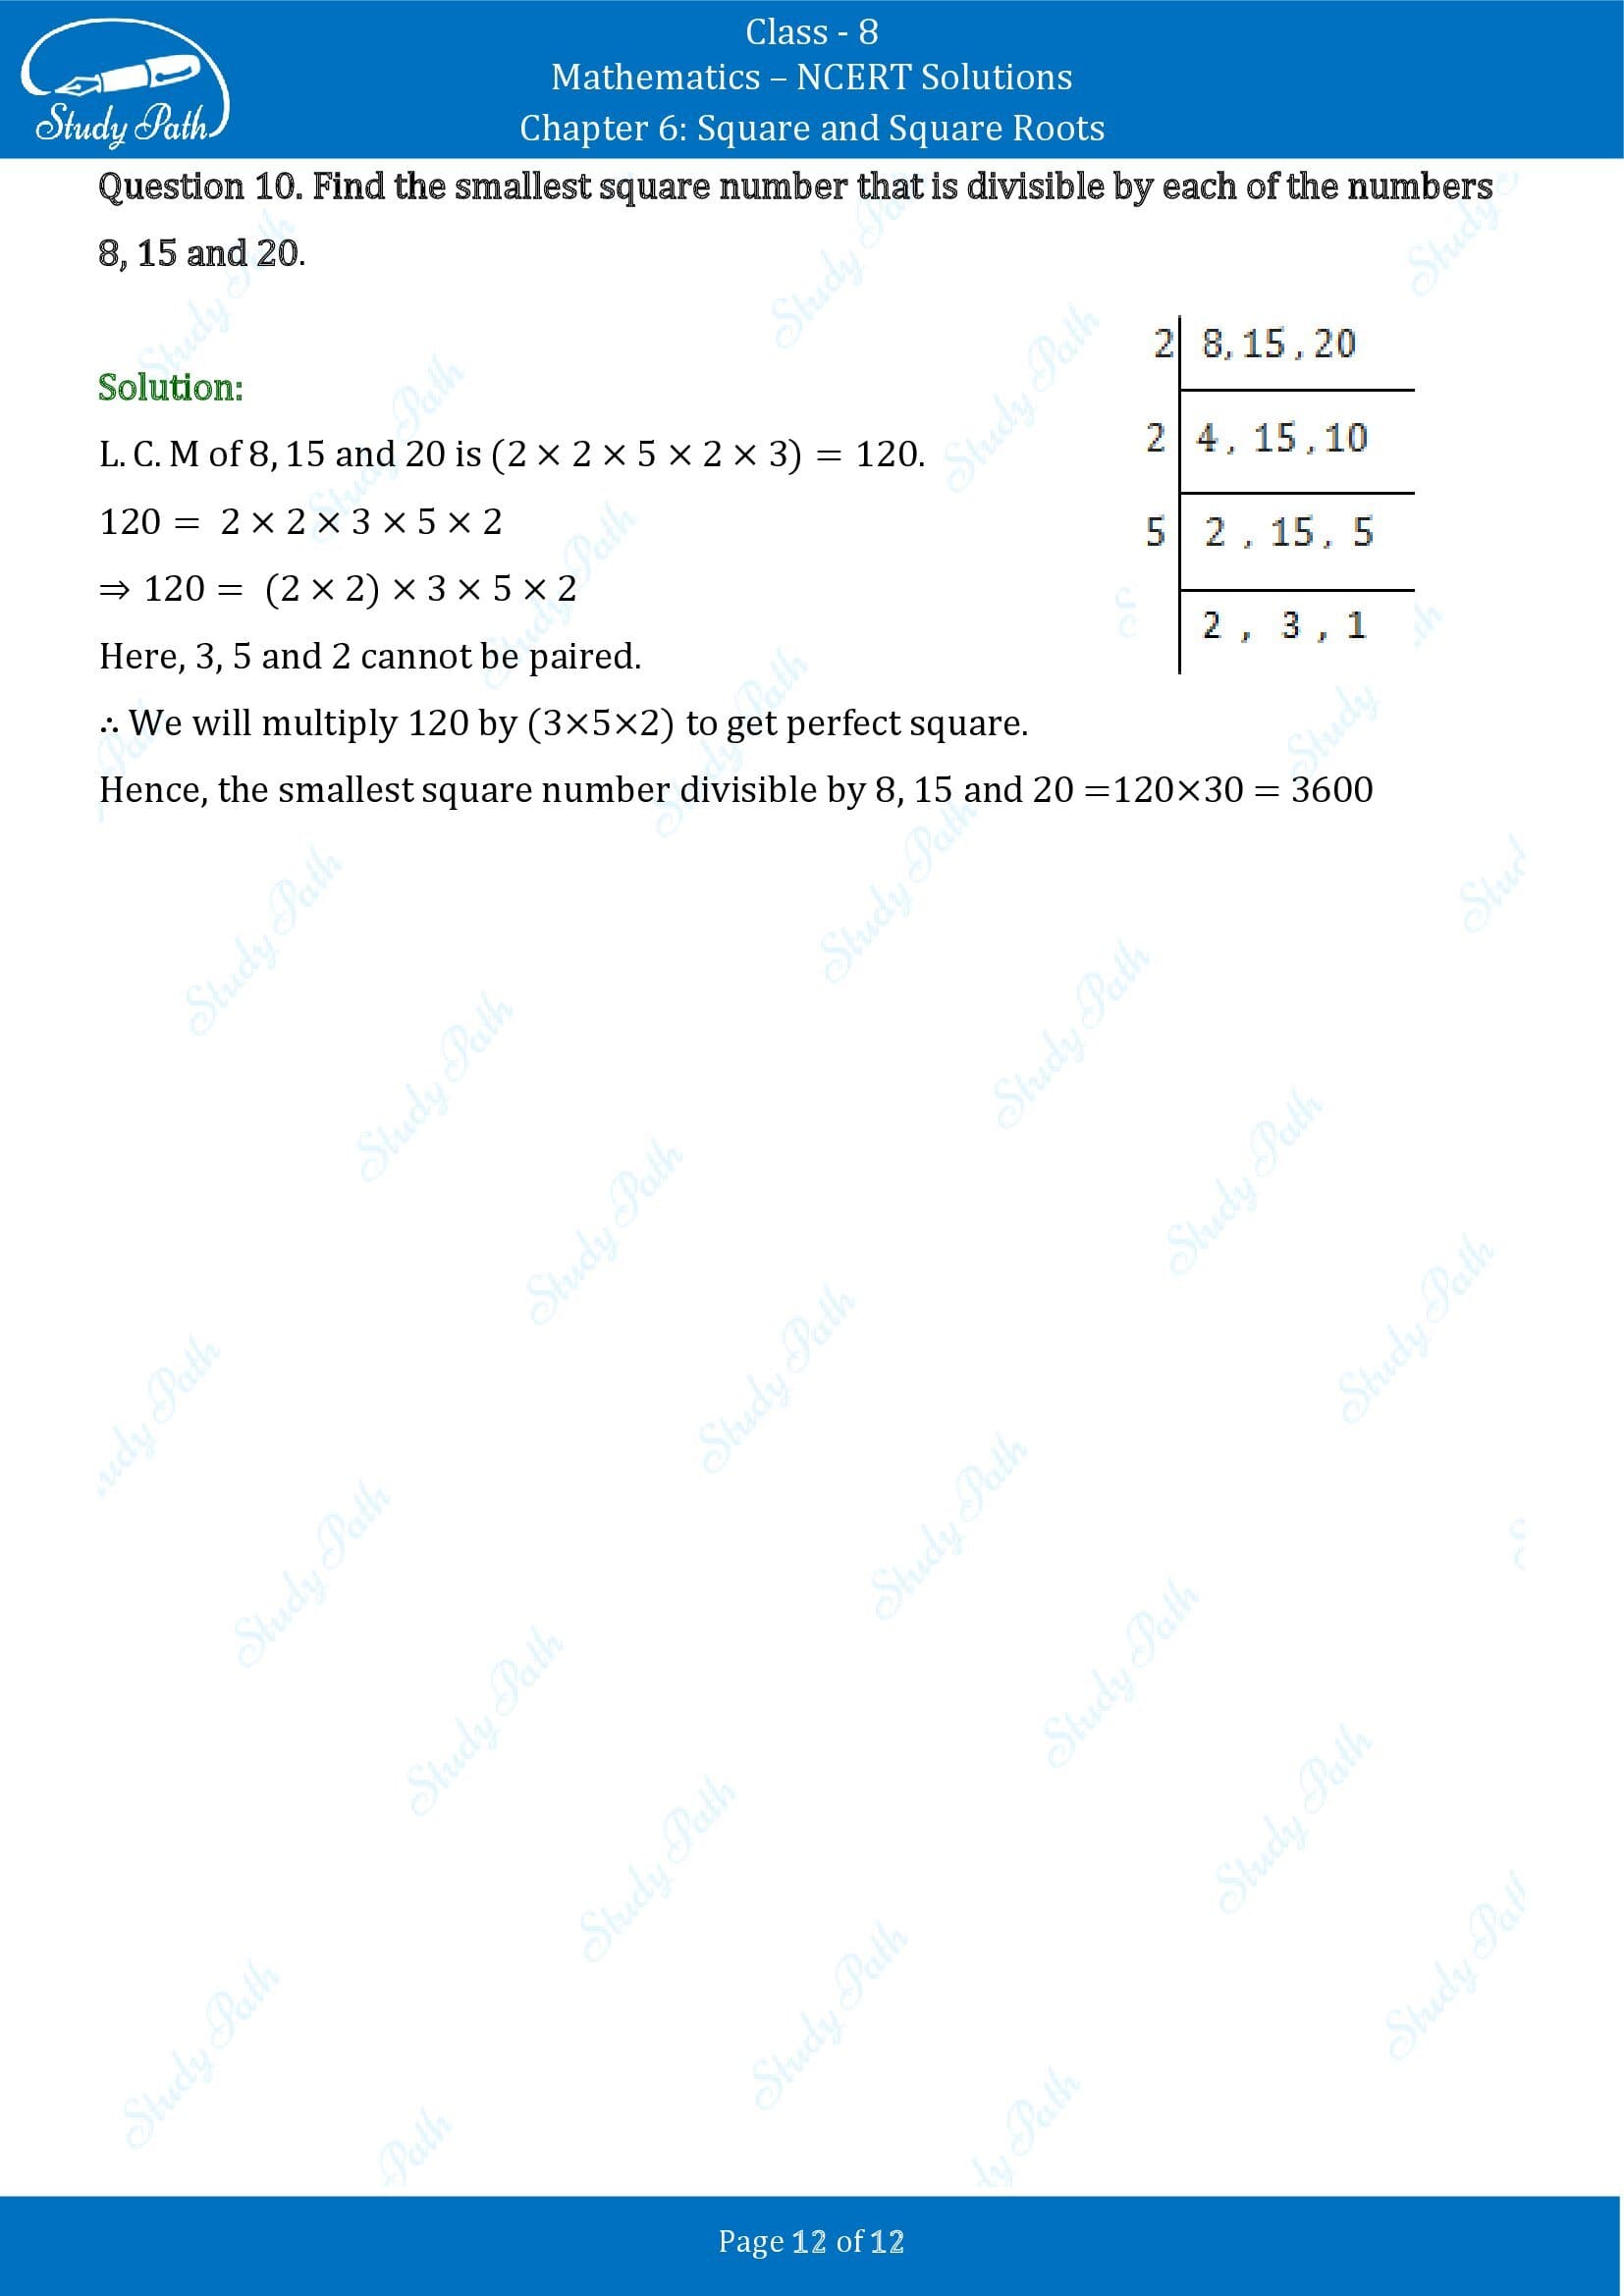 NCERT Solutions for Class 8 Maths Chapter 6 Square and Square Roots Exercise 6.3 00012